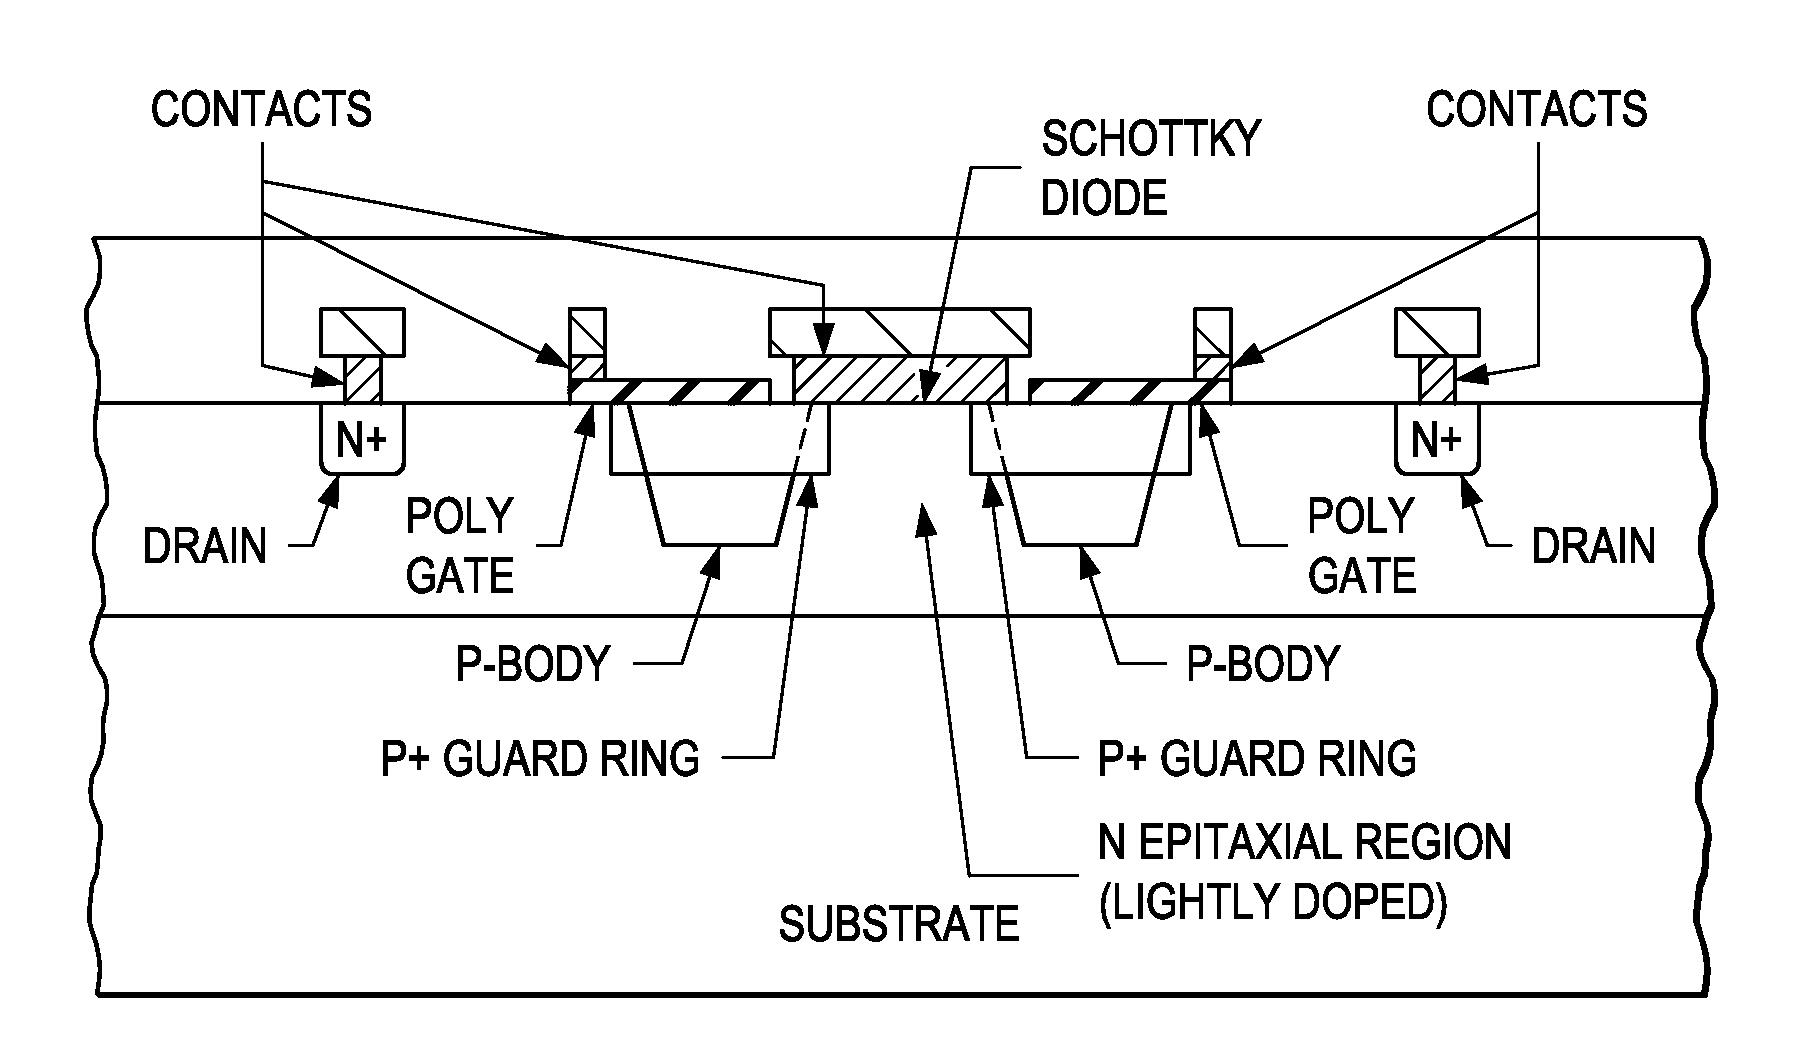 Schottky diode integrated into LDMOS